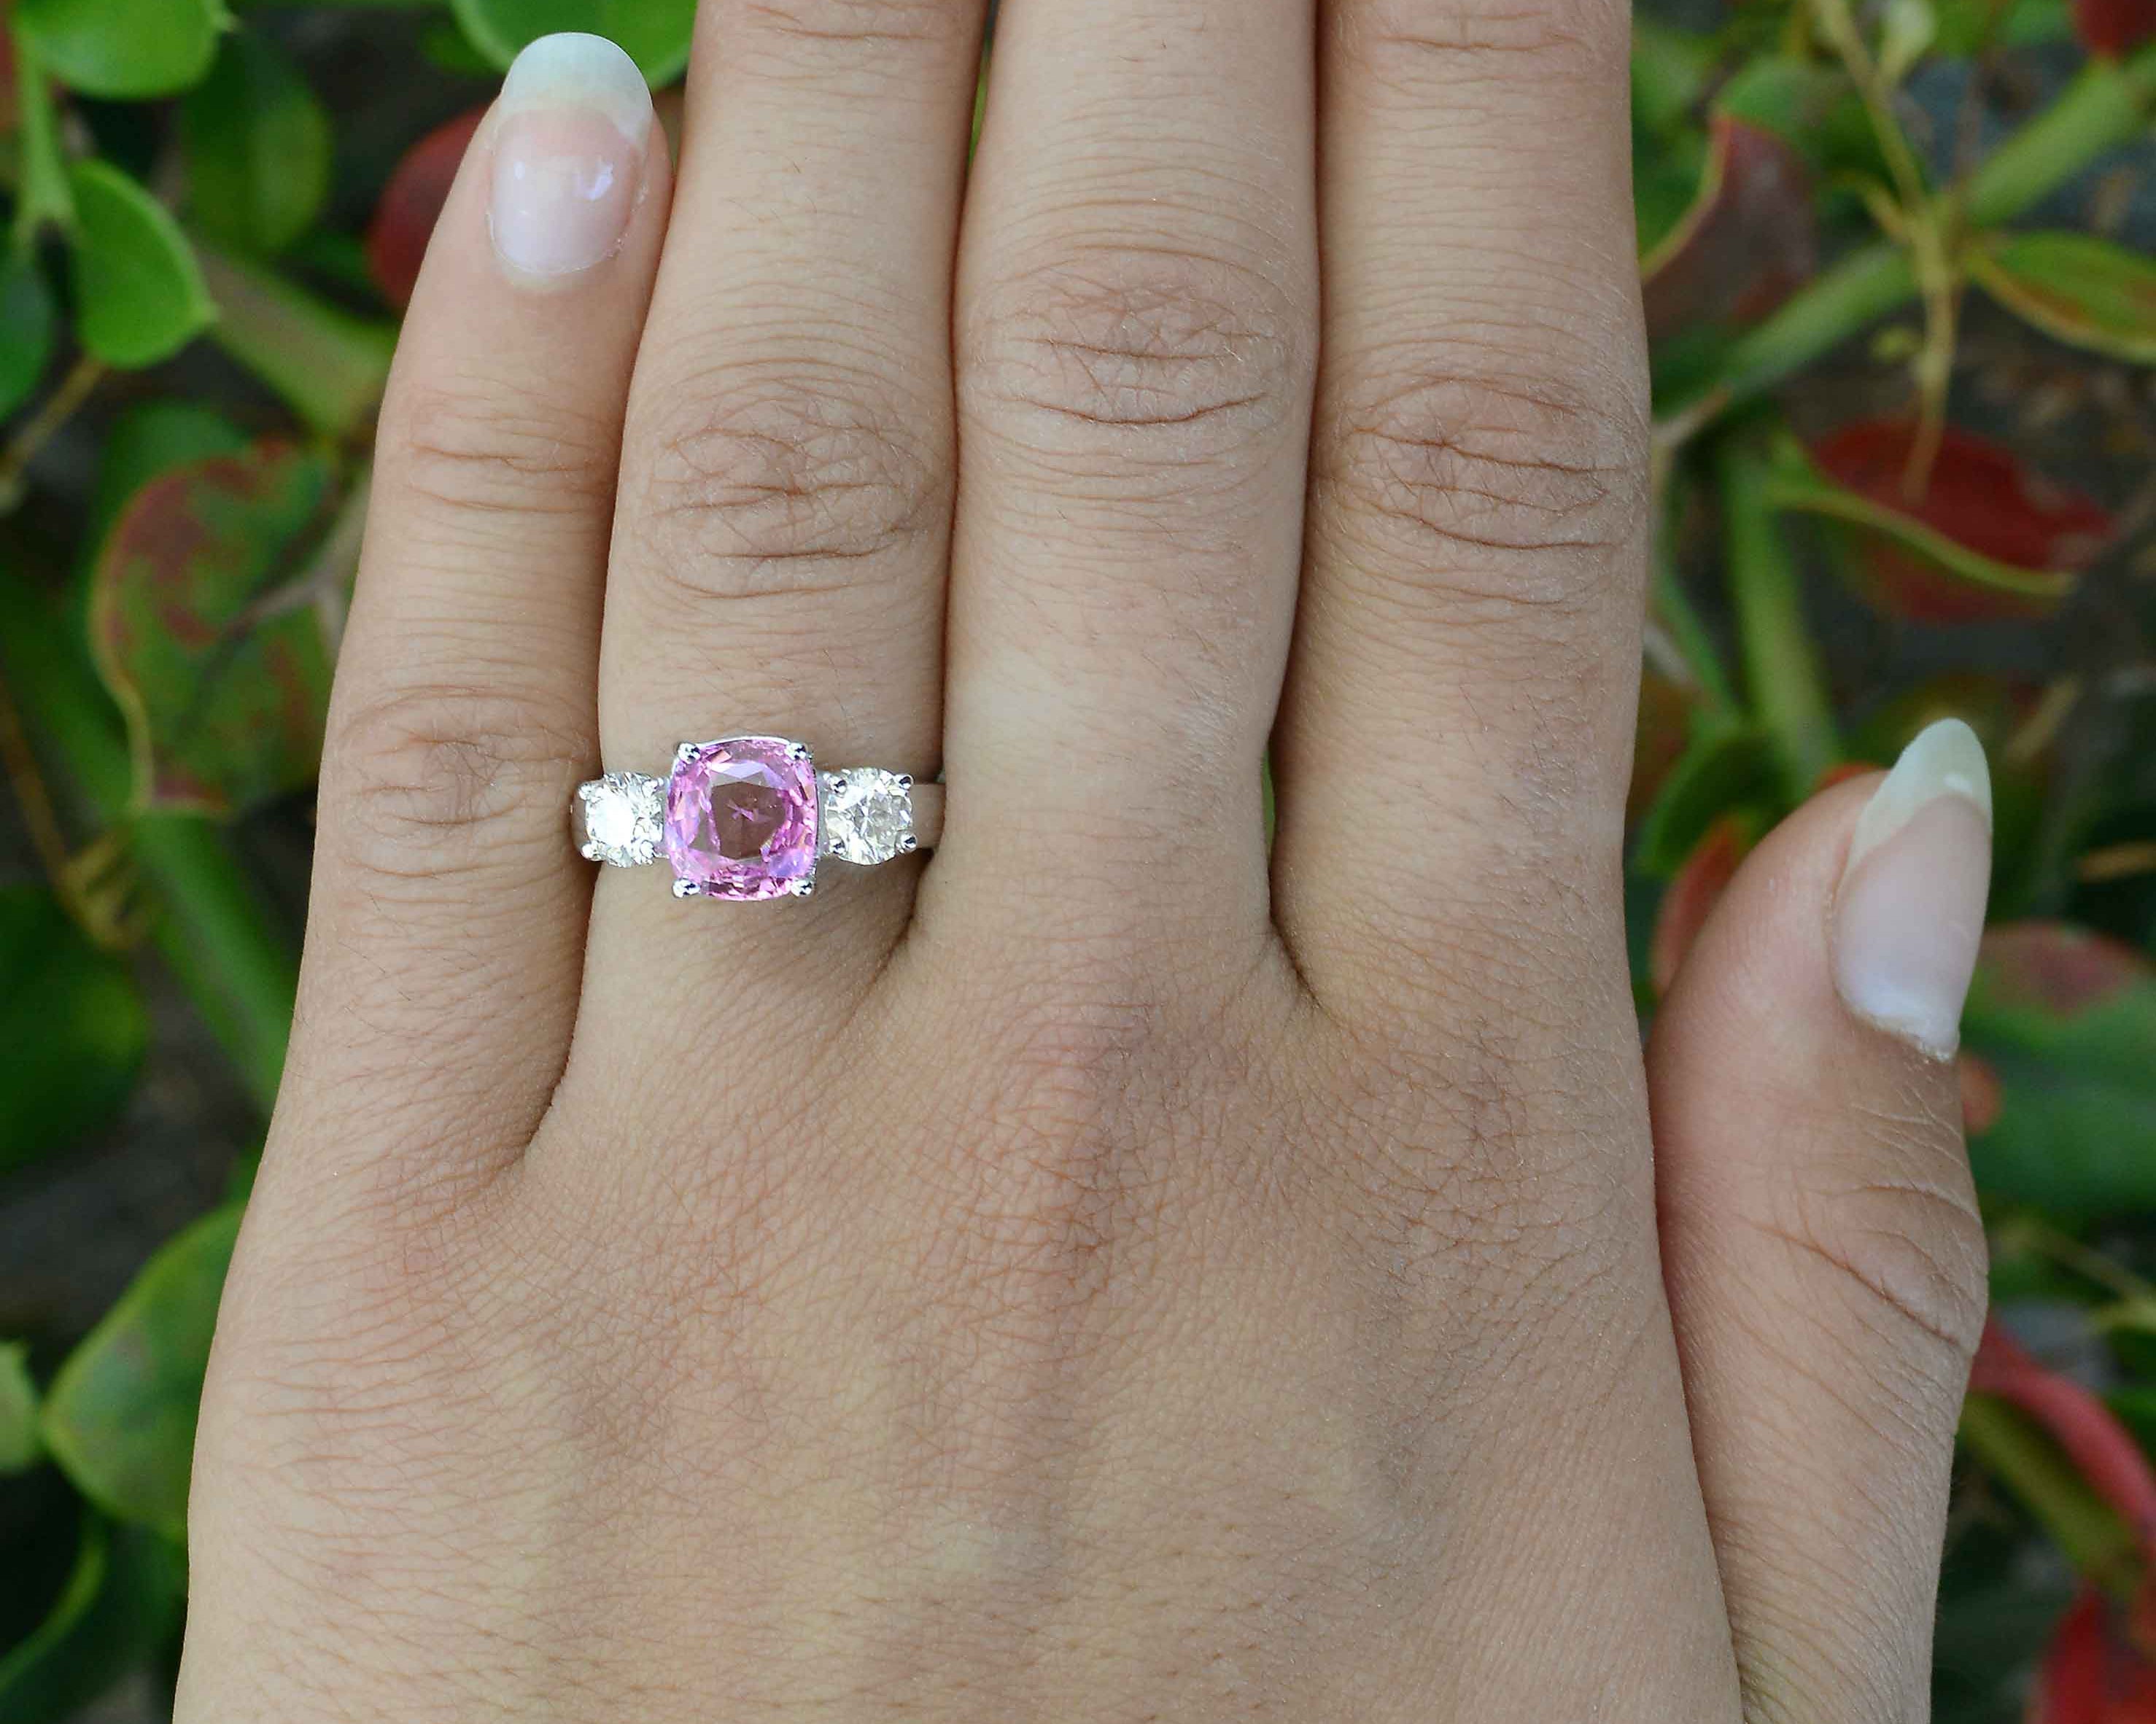 A GIA certified, near 3 carat natural purple pink sapphire with diamonds wedding ring.